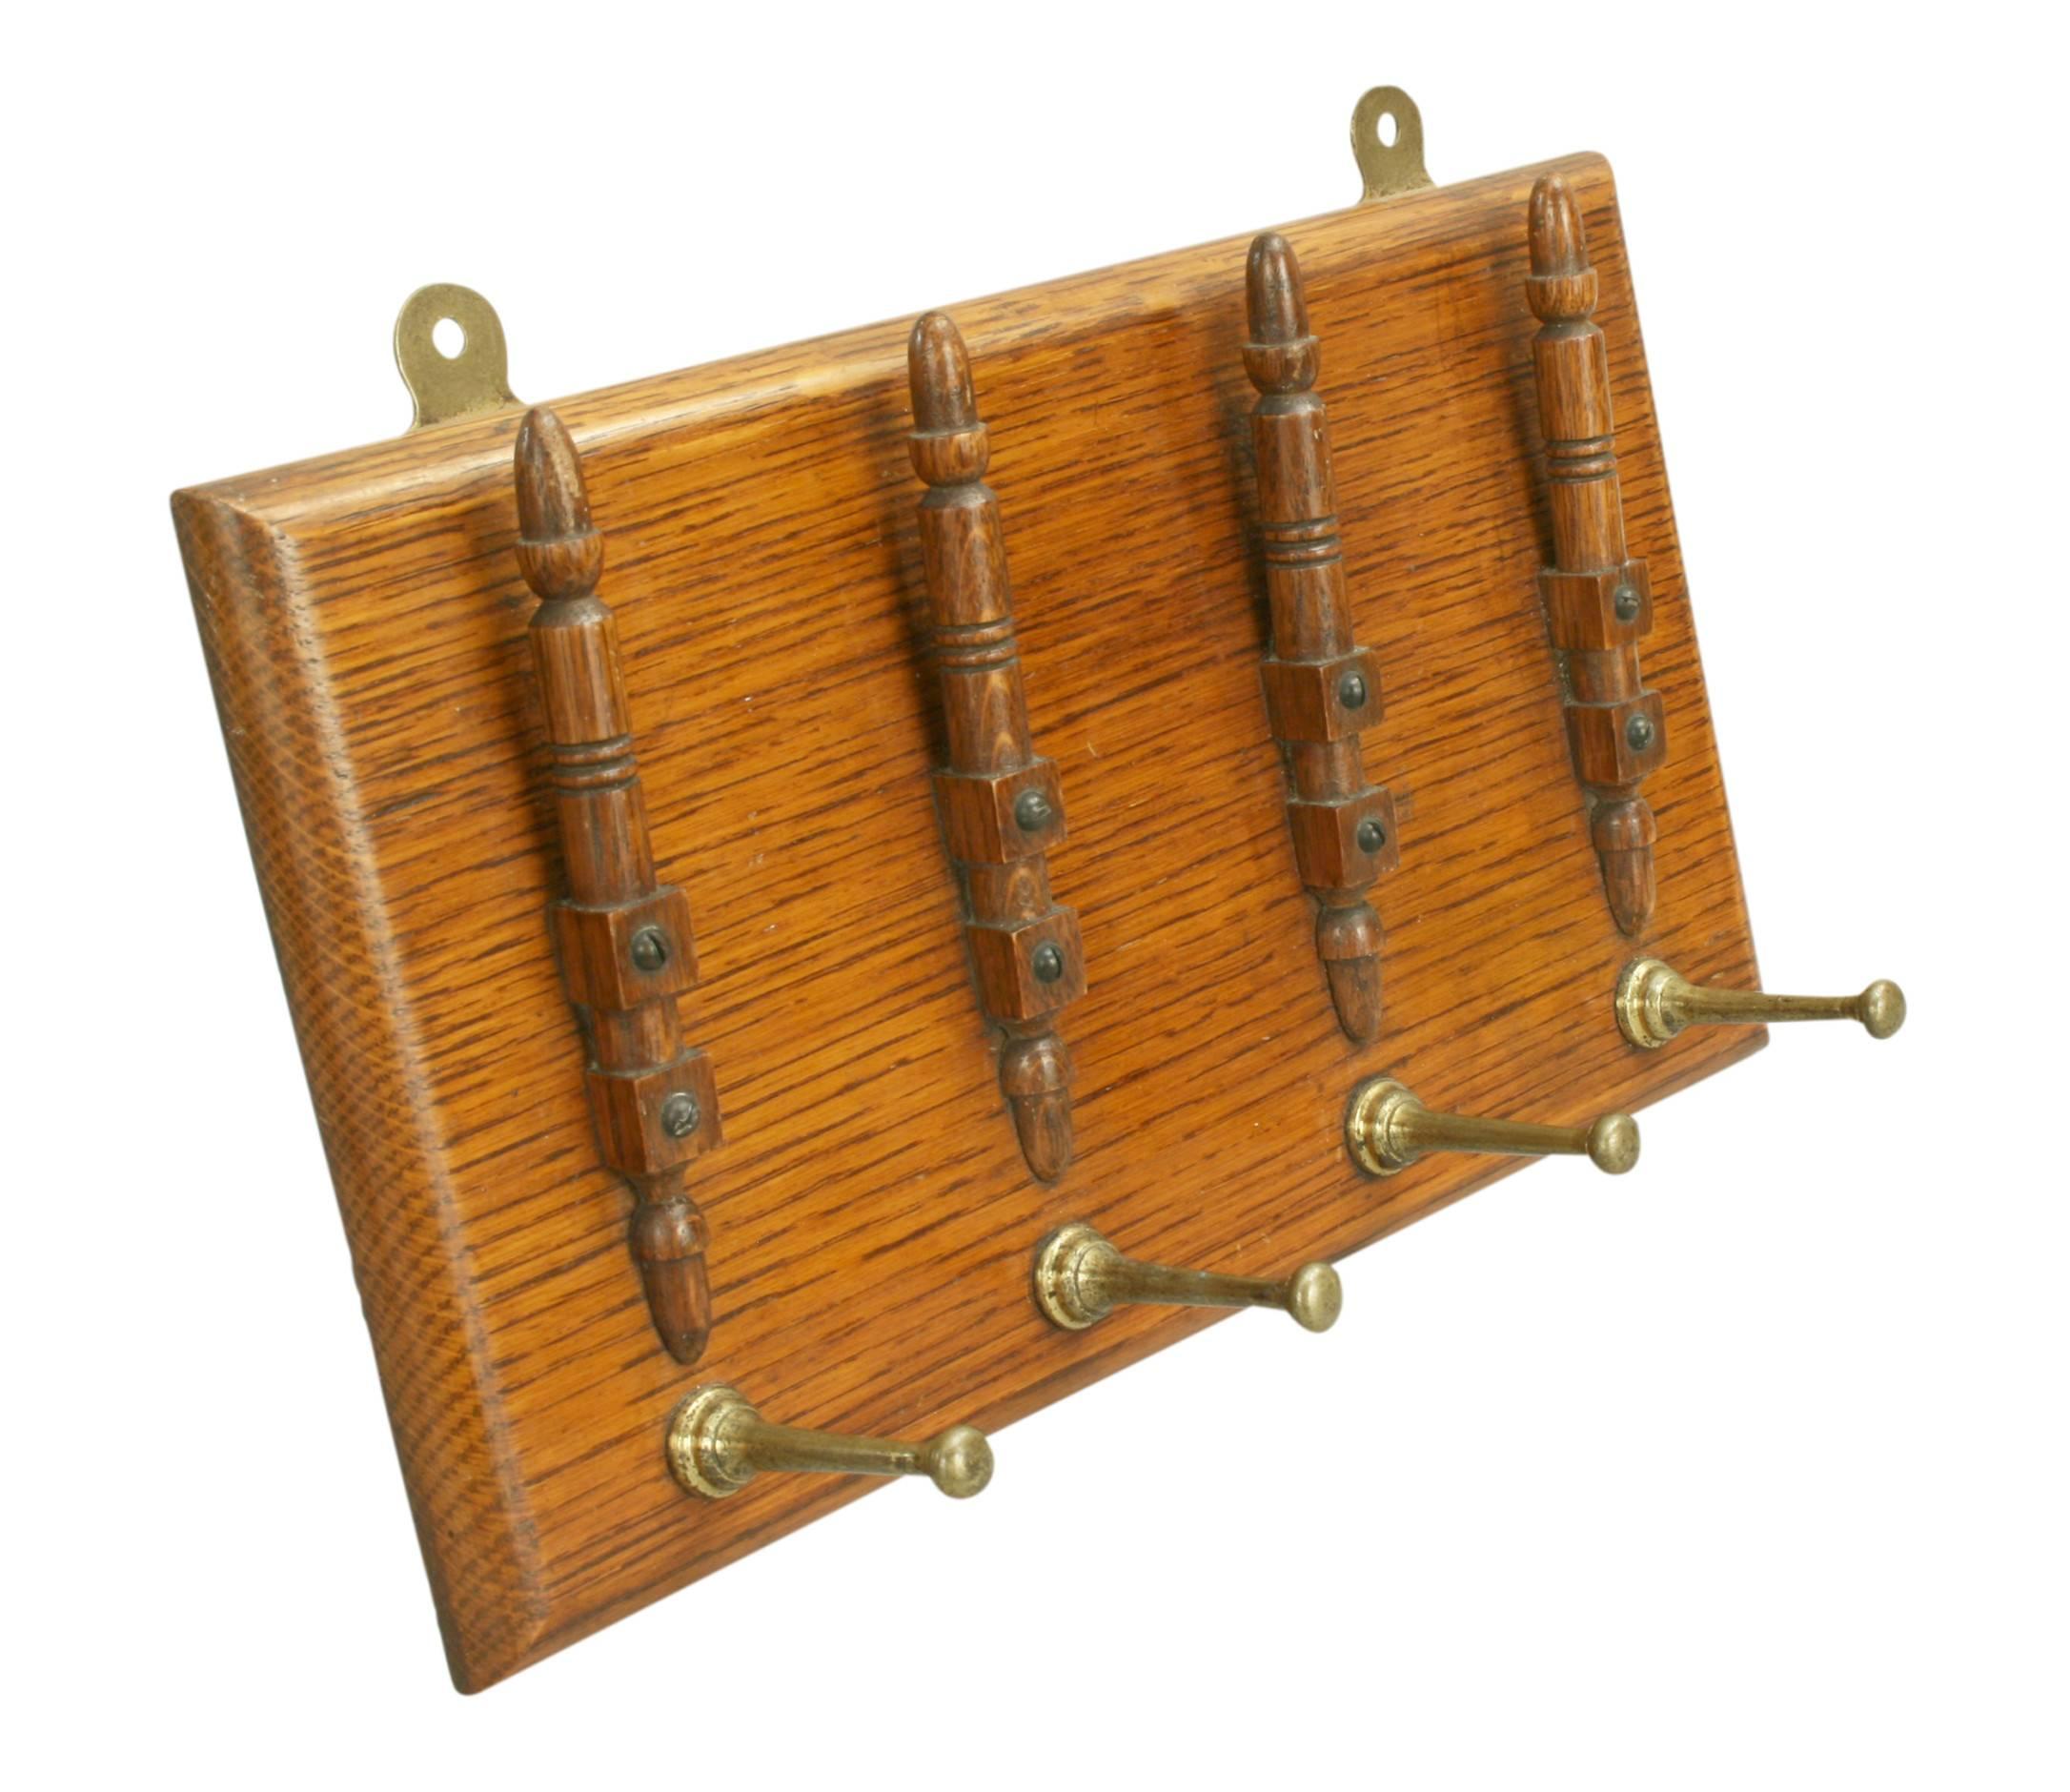 Army and Navy coaching whips rack for four whips. This is a very good quality rack, made from oak with brass hooks. The back is stamped, A & N. CSL Makers and the number 2095.
All in very good original condition with the brass hooks still